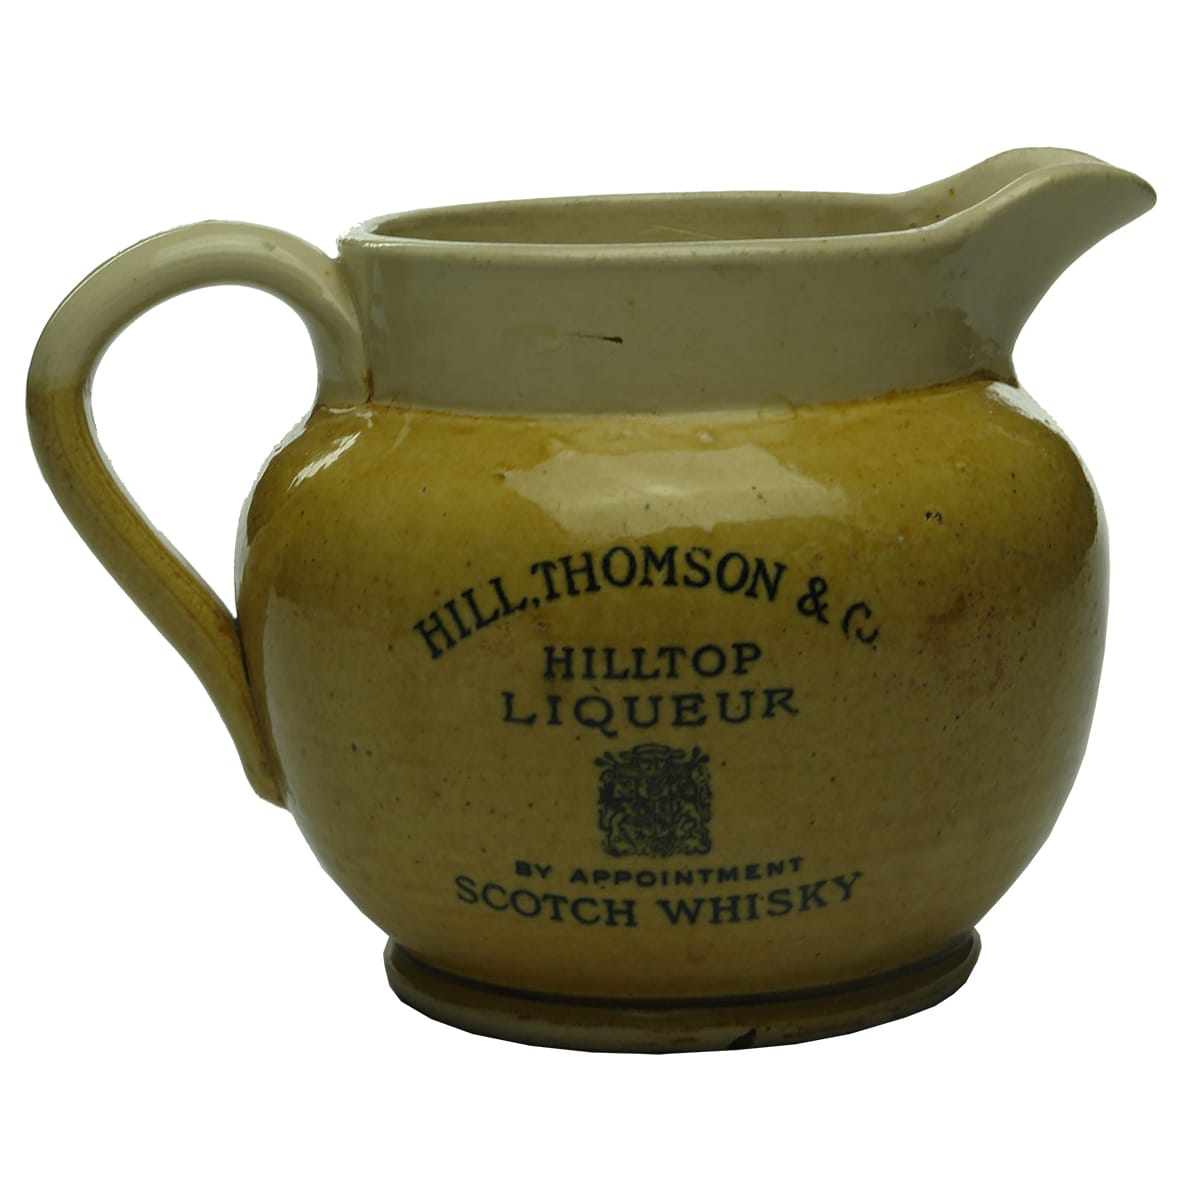 Whisky Water Jug. Hill Thomson Hilltop Liqueur Scotch Whisky.